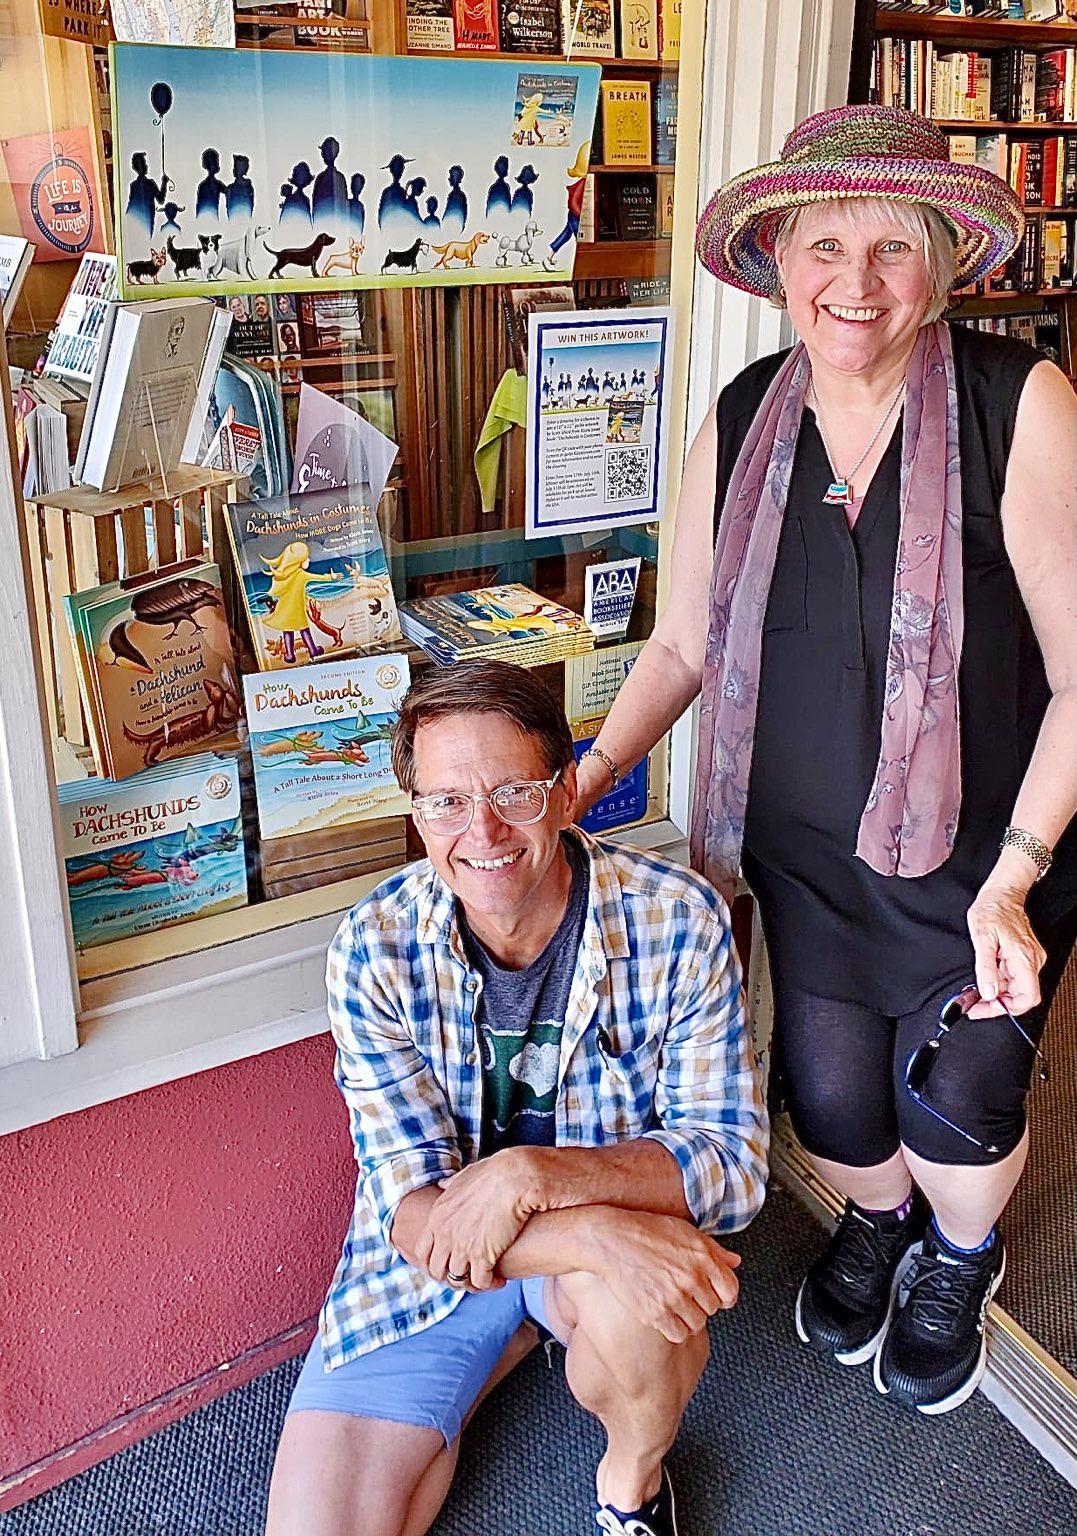 Edmonds Bookshop fabulous Window Display! Much appreciation Michelle for your creative arrangement. Gratitude to owner Mary Kay and Team for continued enthusiasm & support! (Caption with us looking through the window: □ □ “How much are those people in the window!?”□□